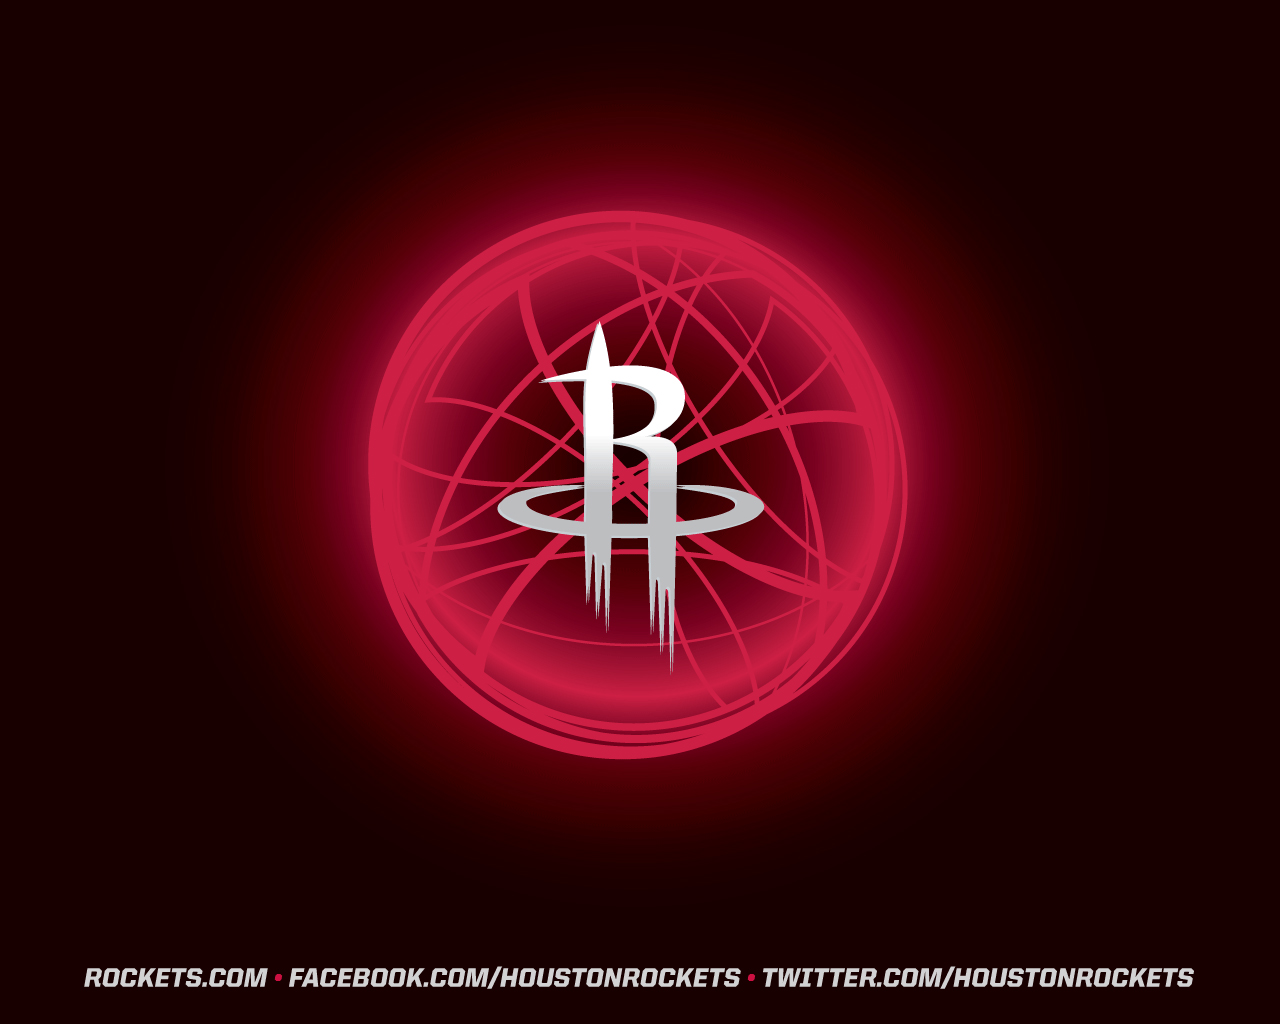 Rockets Wallpaper   NBA NEW THE OFFICIAL SITE OF THE HOUSTON ROCKETS 1280x1024